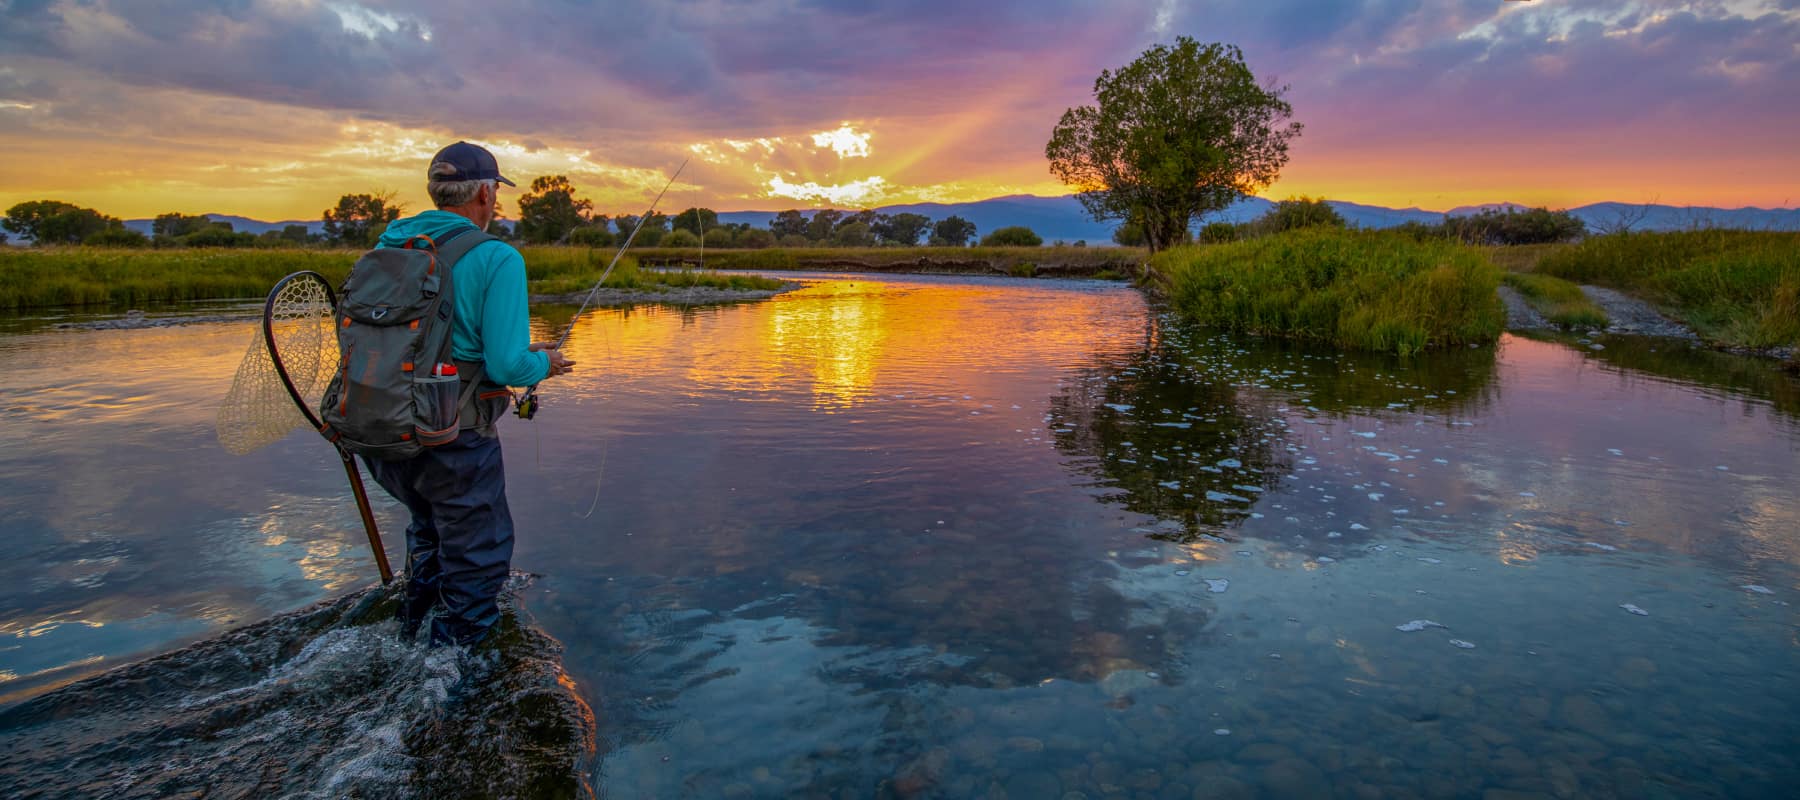 Fishpond USA Fly Fishing Gear is designed in Colorado, but used worldwide.